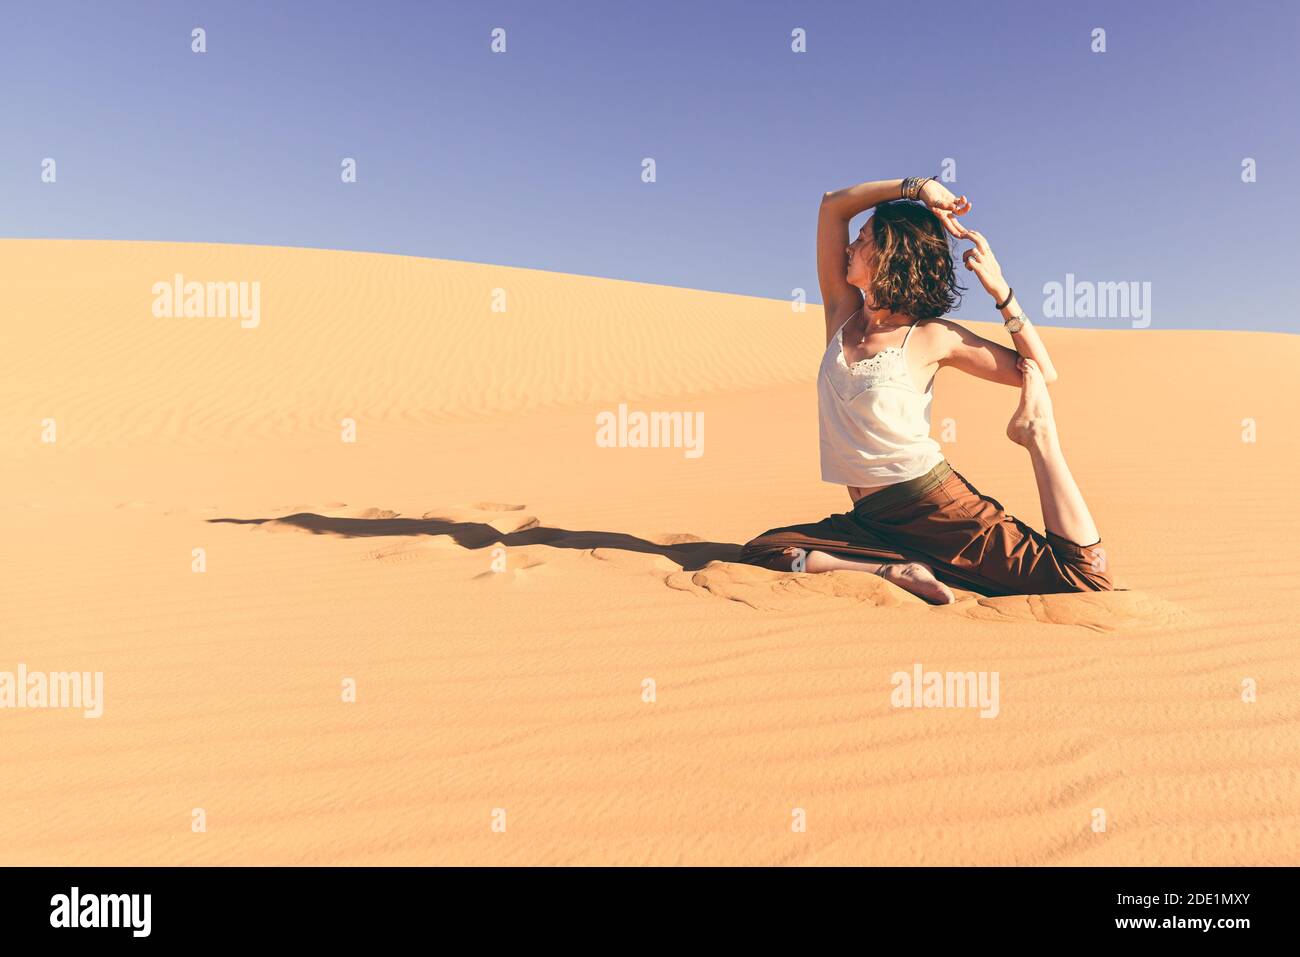 Yoga meditation on the sand dune,healthy female body in peace, woman sitting relaxed on sand, calm girl enjoying nature, active vacation lifestyle, z Stock Photo